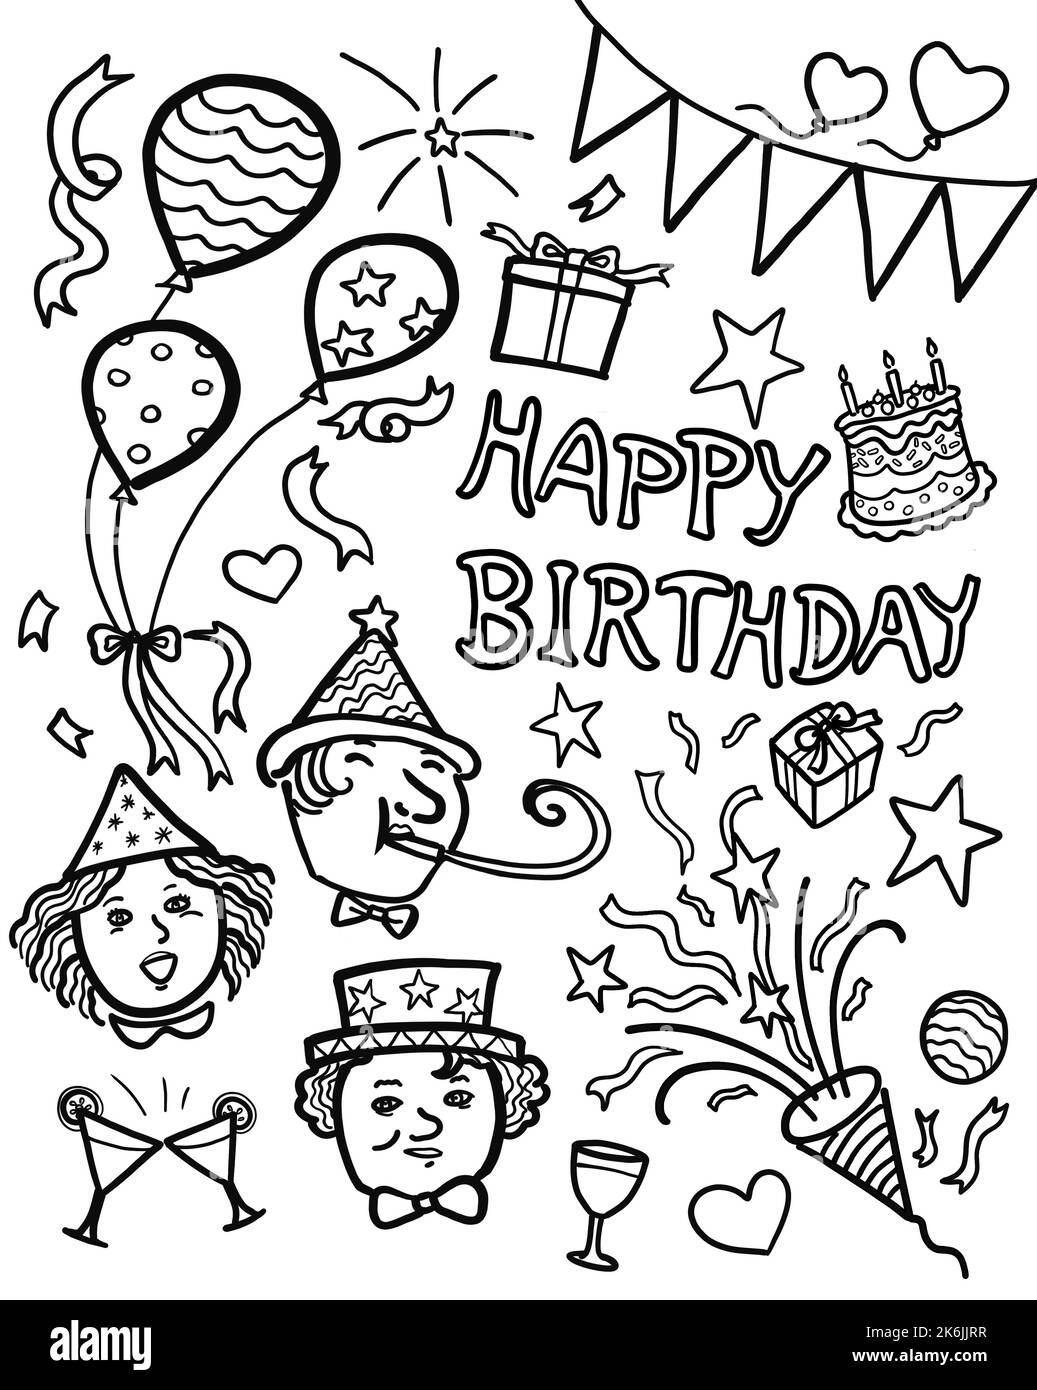 Illustration black and white line drawing of group of young people celebrate birthday party. Happy birthday celebration concept. Stock Photo